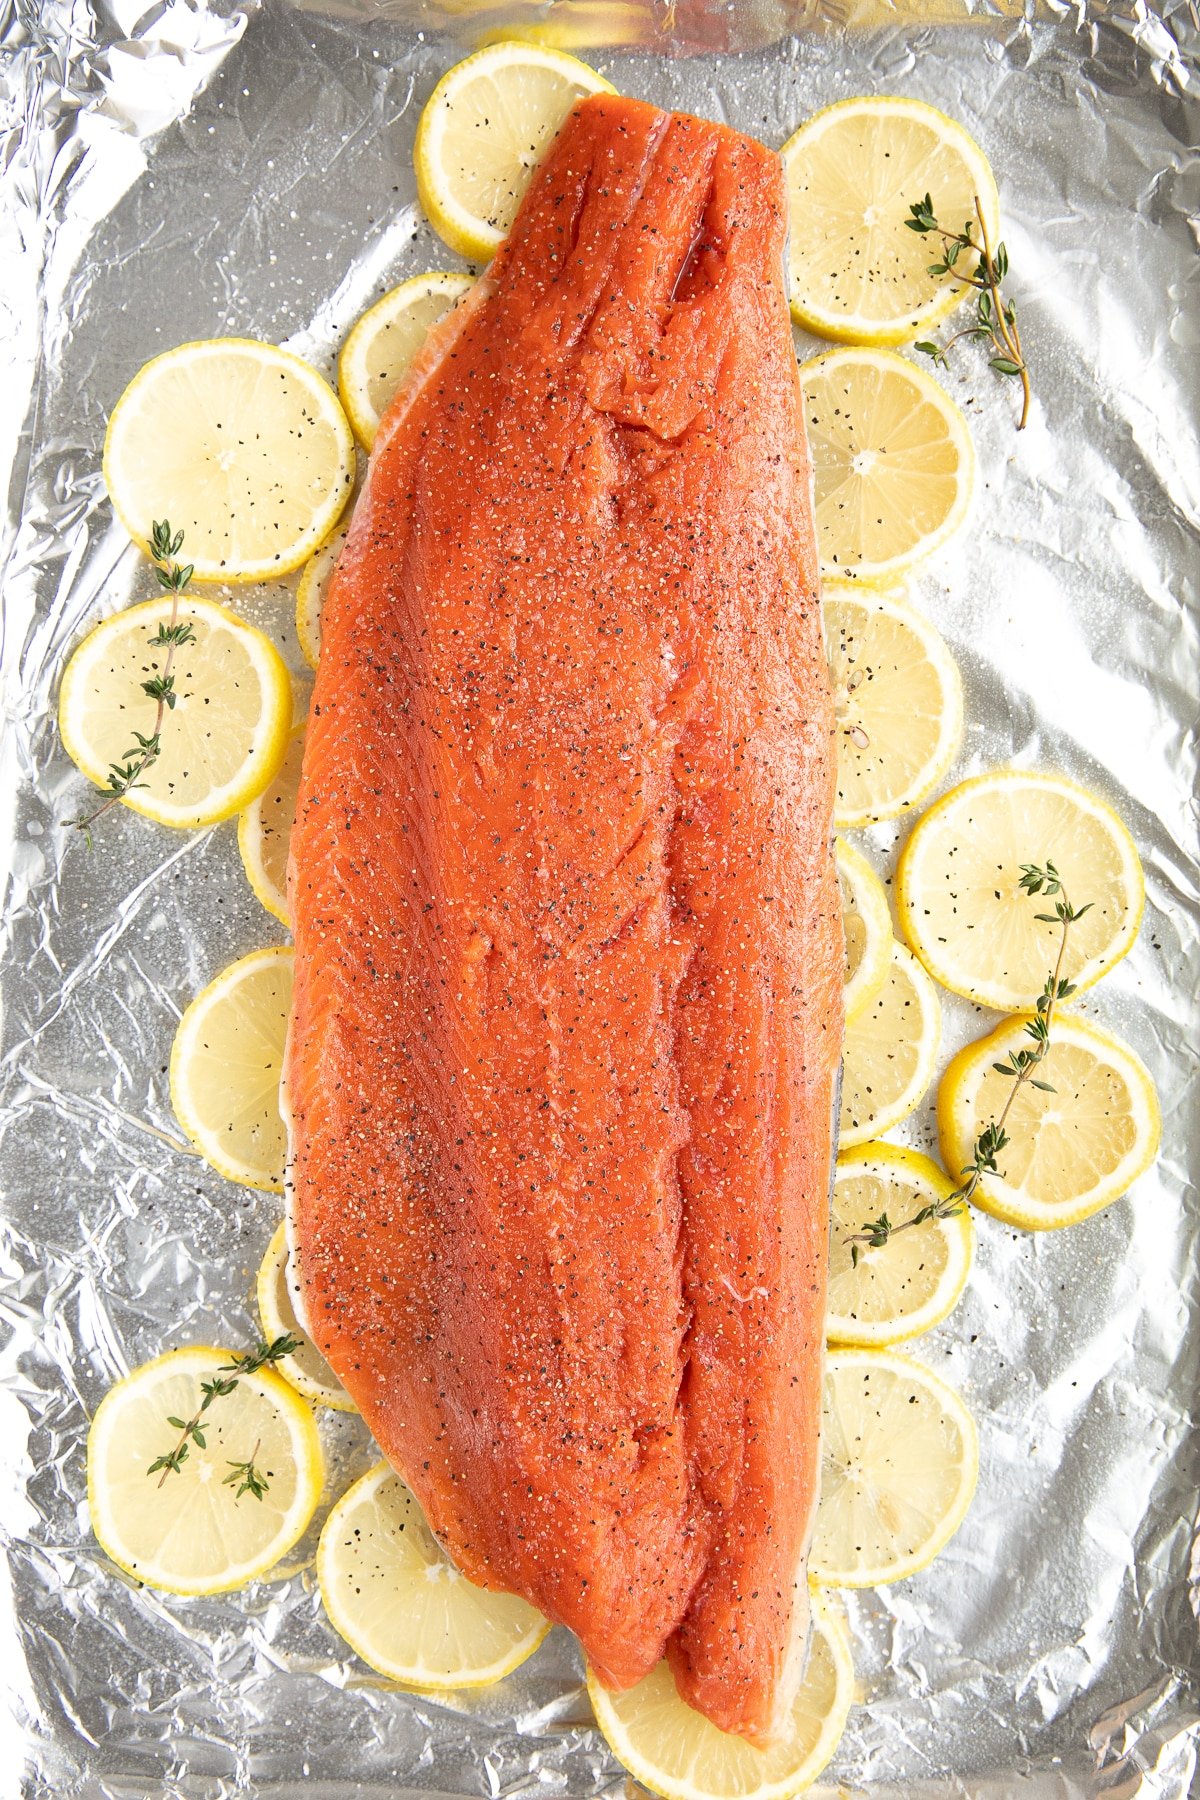 Image of a baking sheet lined with foil, topped with sliced lemons, and topped with a large wild salmon fillet garnished with fresh thyme.